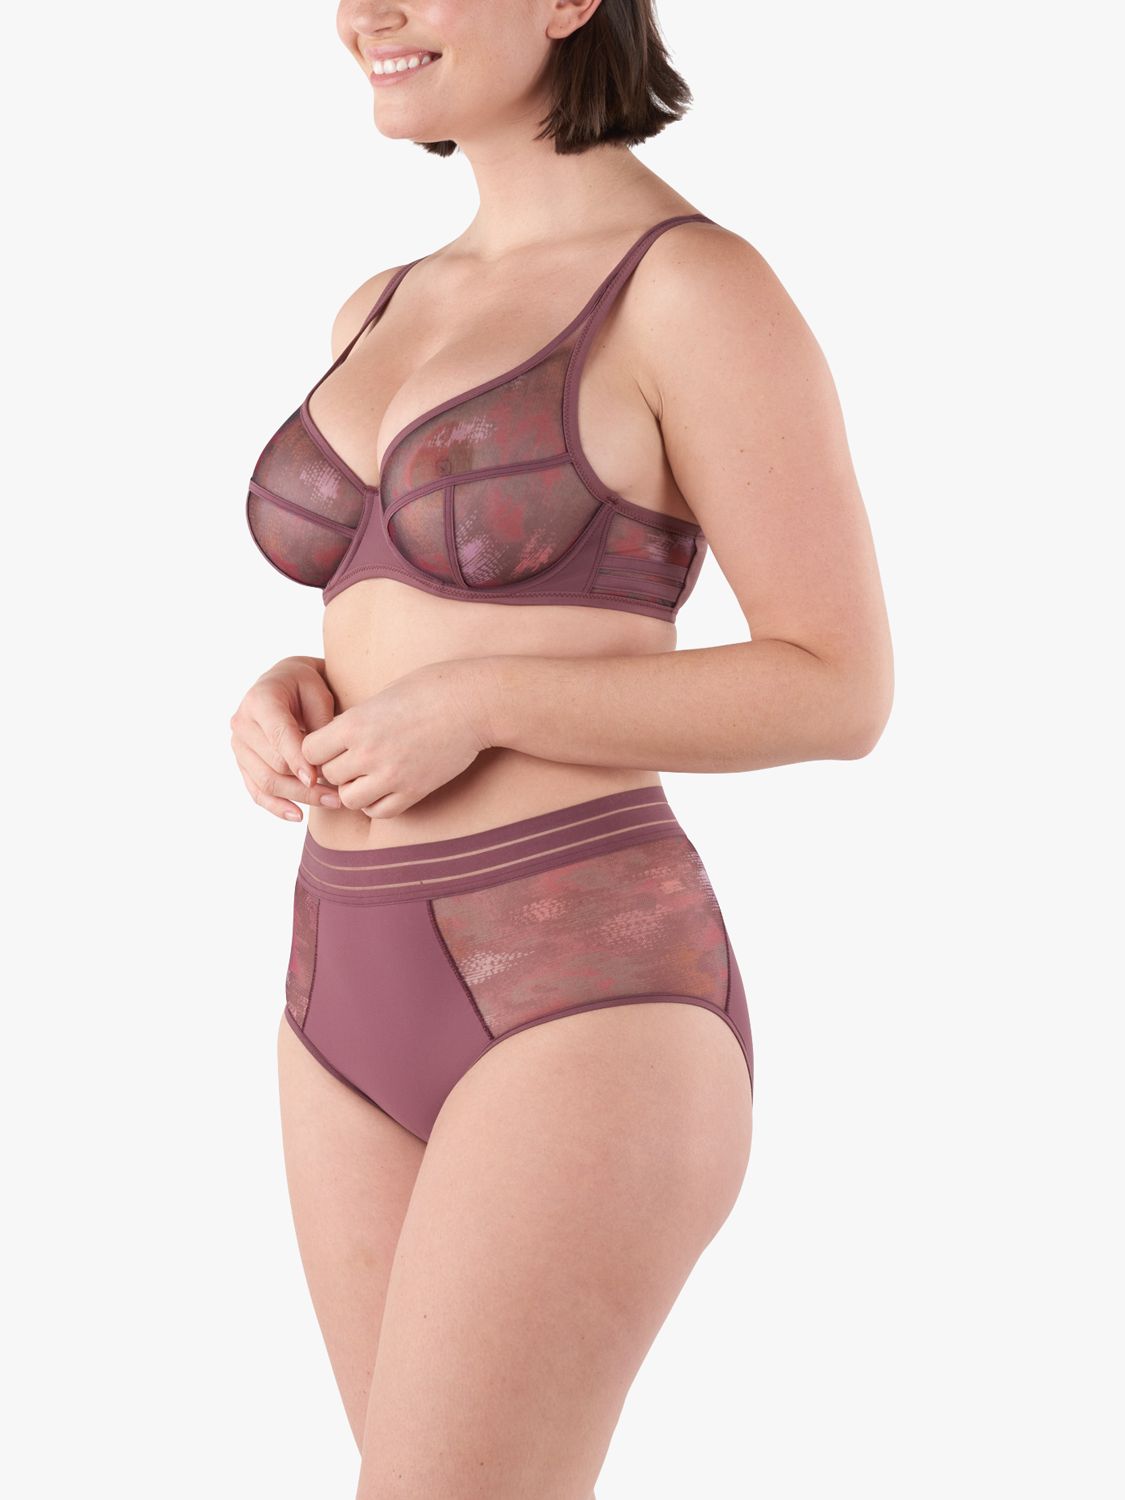 Maison Lejaby Fully Embroidered Underwired Bra, Blurry Night at